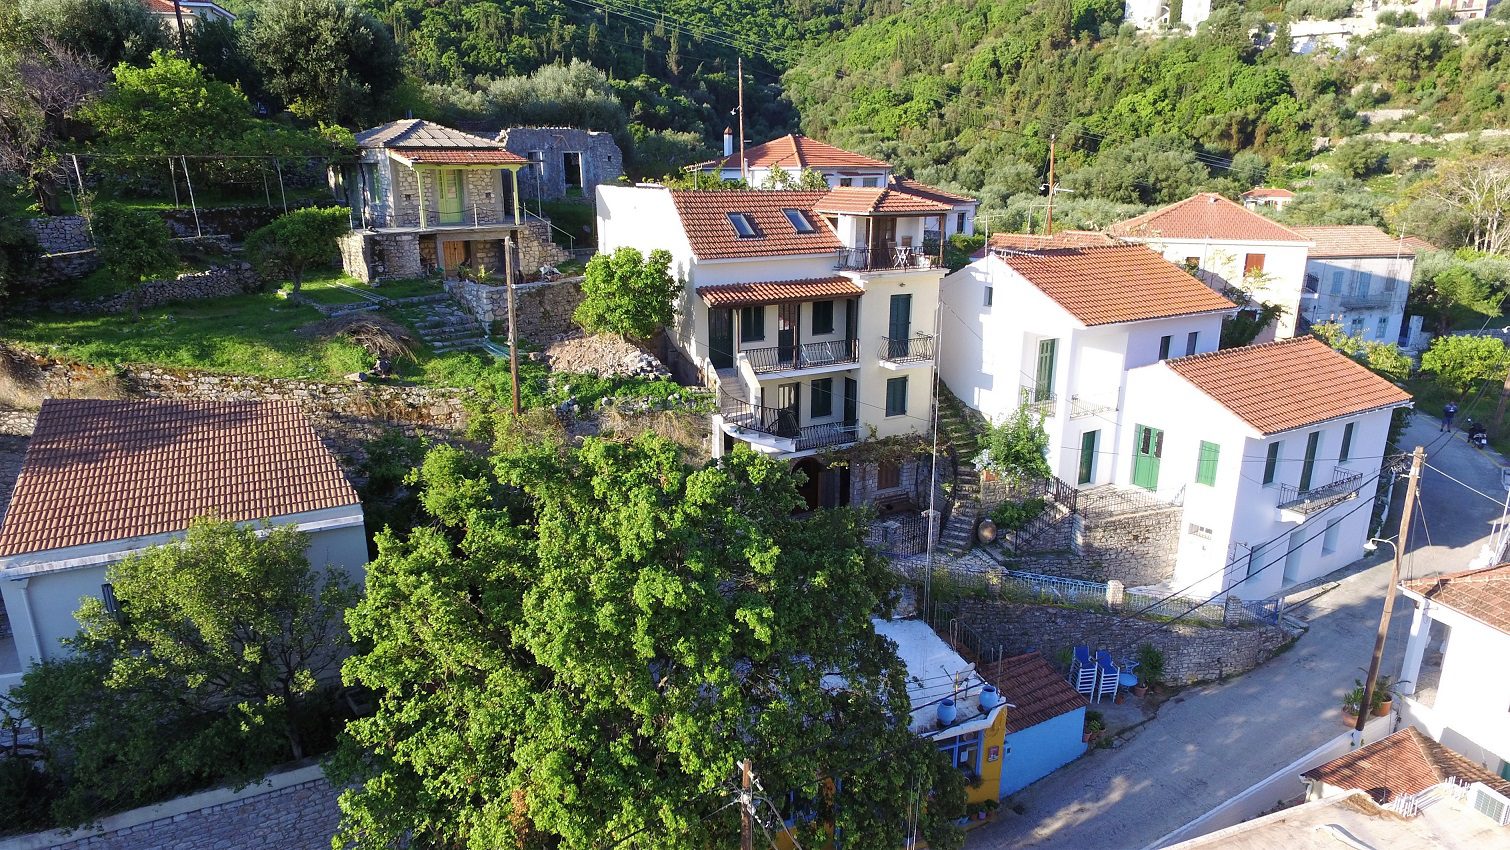 Aerial view of holiday apartment for rent on Ithaca Greece, Kioni